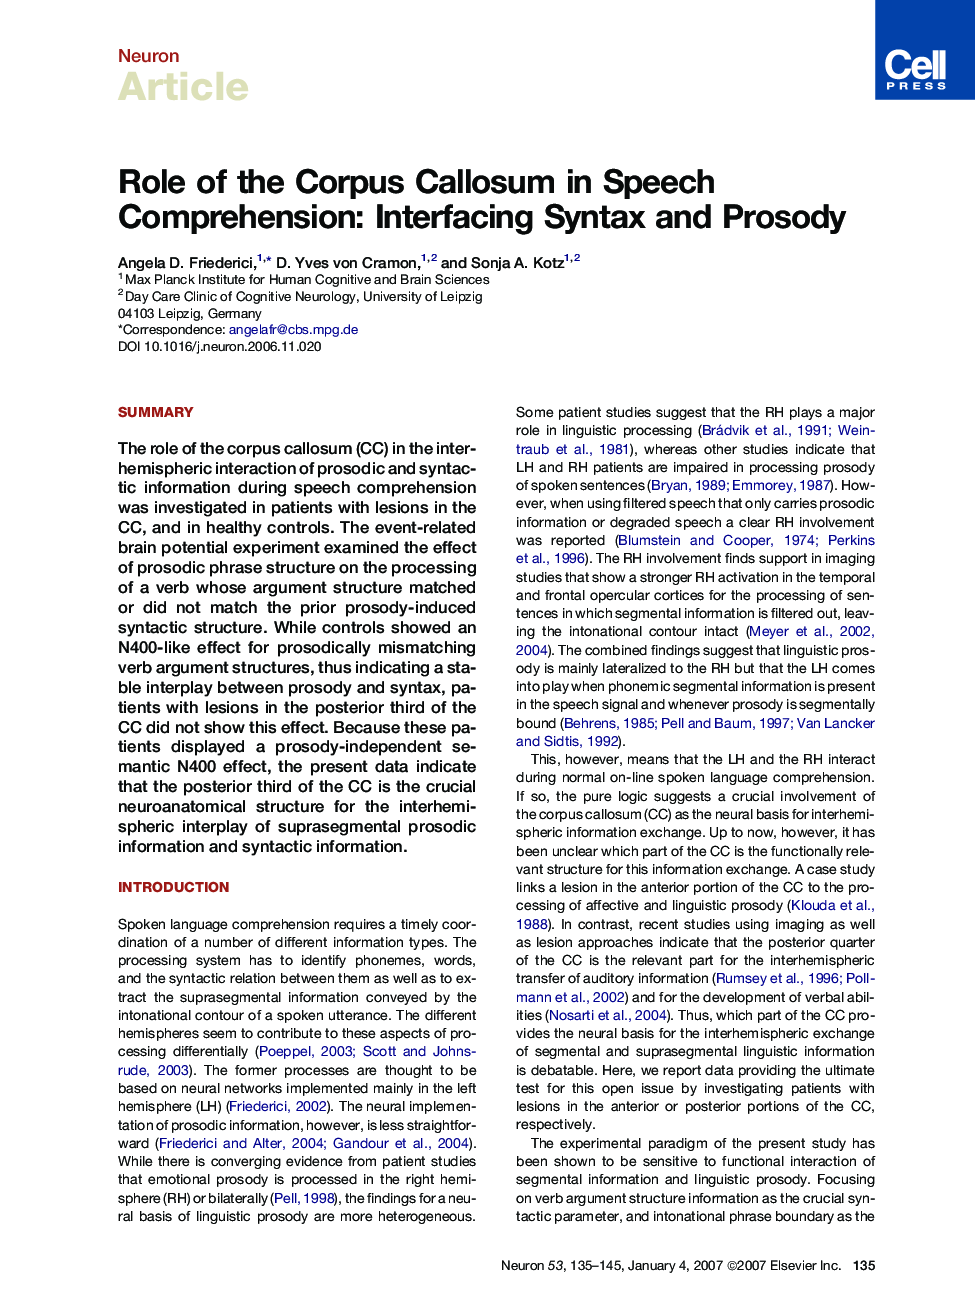 Role of the Corpus Callosum in Speech Comprehension: Interfacing Syntax and Prosody